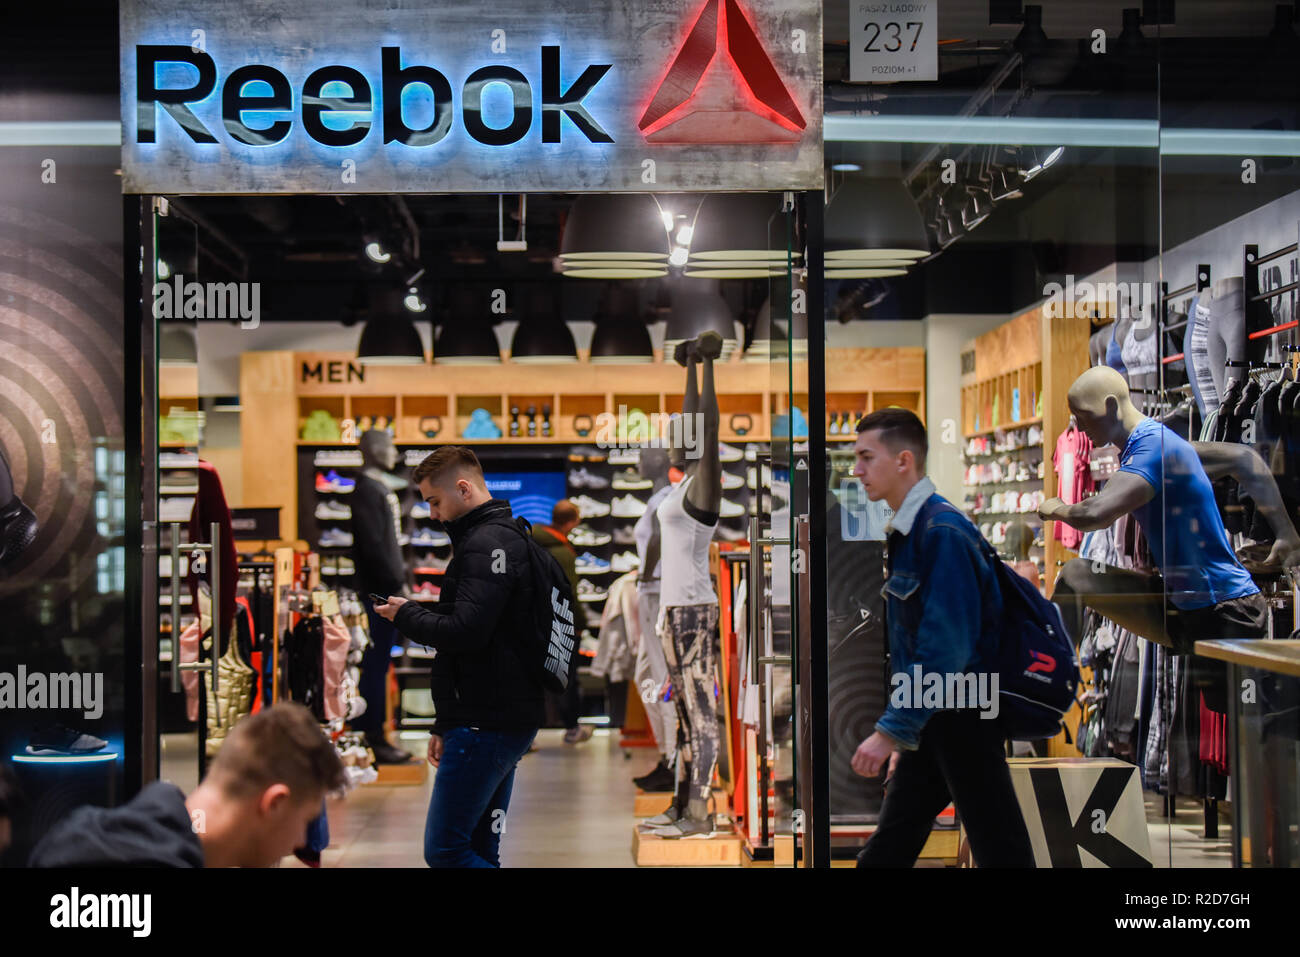 magasin reebok opera, great bargain Save 80% available - wlselectrique.com